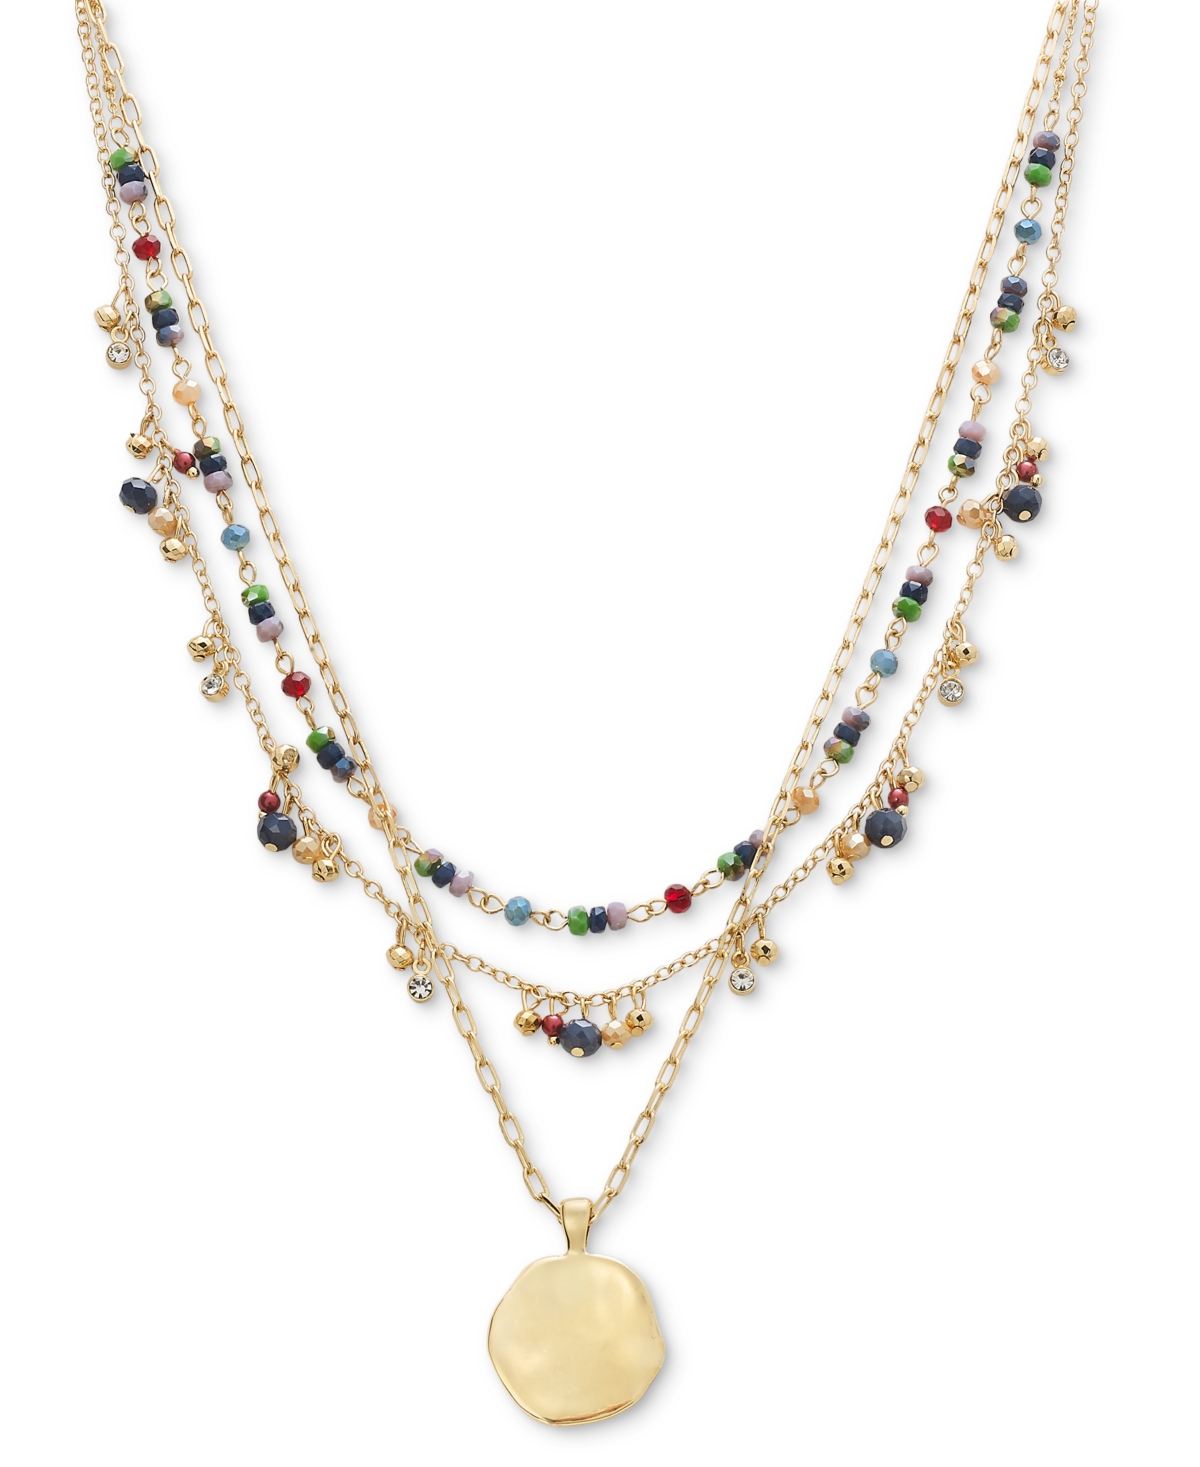 Mixed-Metal Layered Beaded Pendant Necklace, 17" + 3" extender, Created for Macy's - Silver